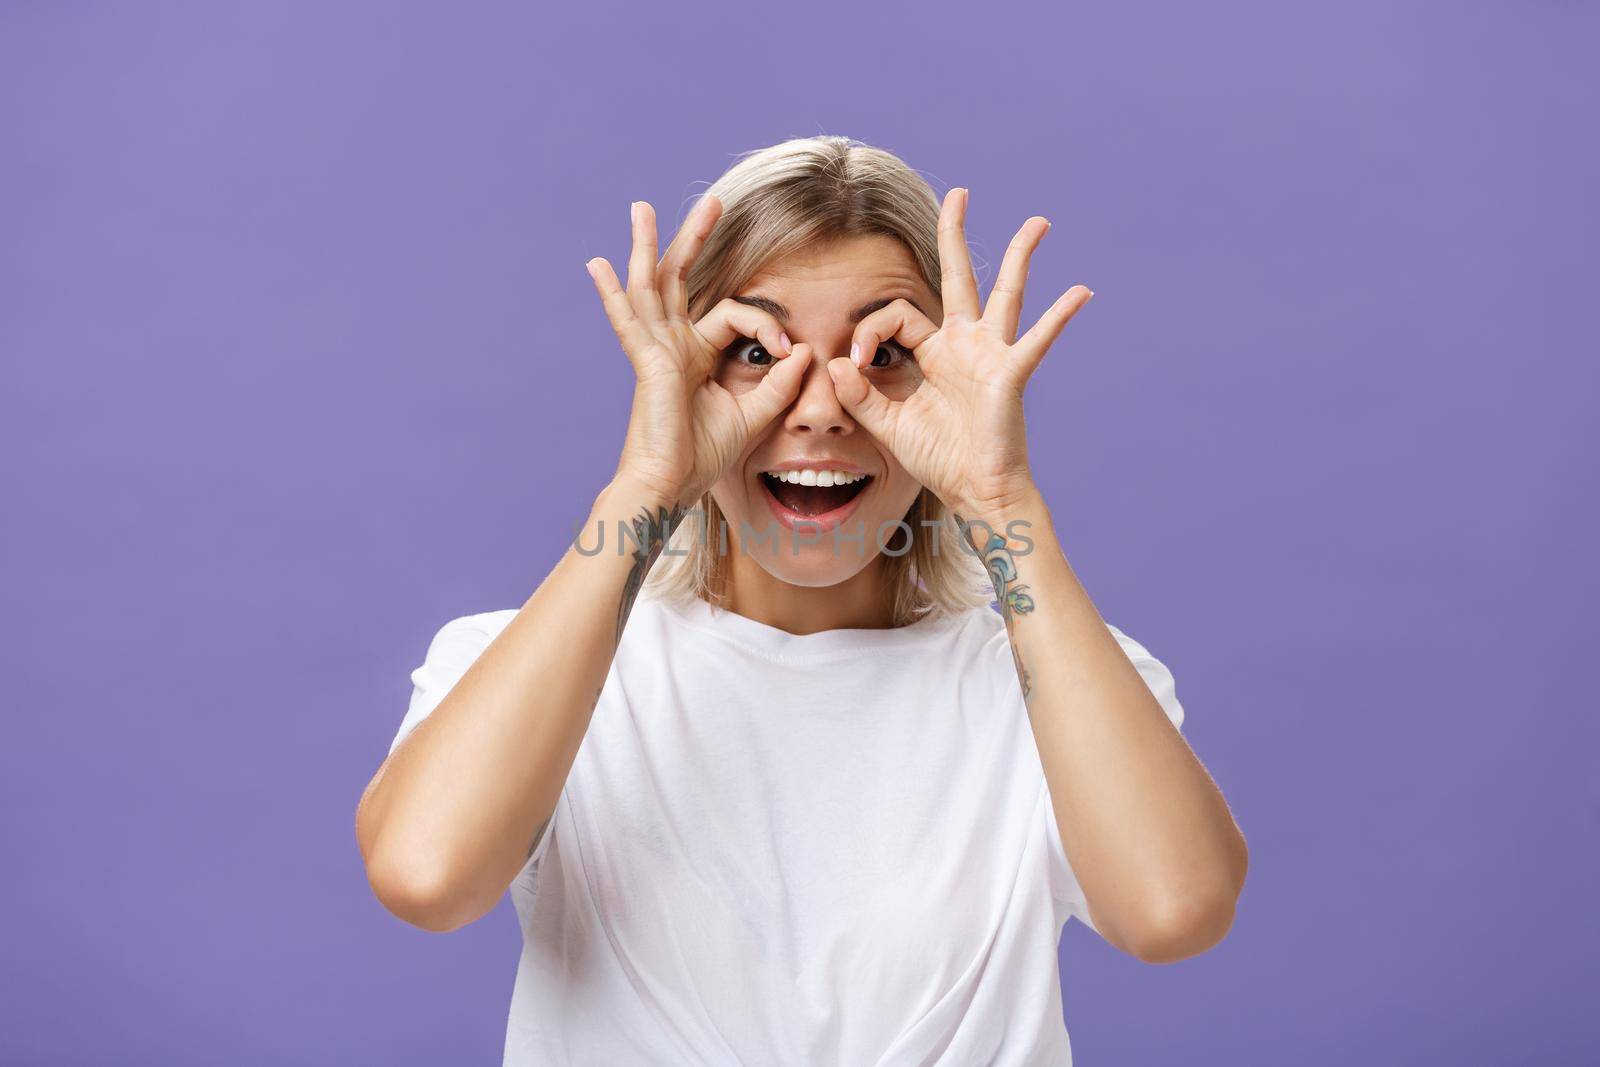 Looking at awesome discounts. Portrait of impressed amused and happy good-looking stylish young woman with tattoos on arms making circles with hands over eyes smiling with admiration at camera by Benzoix